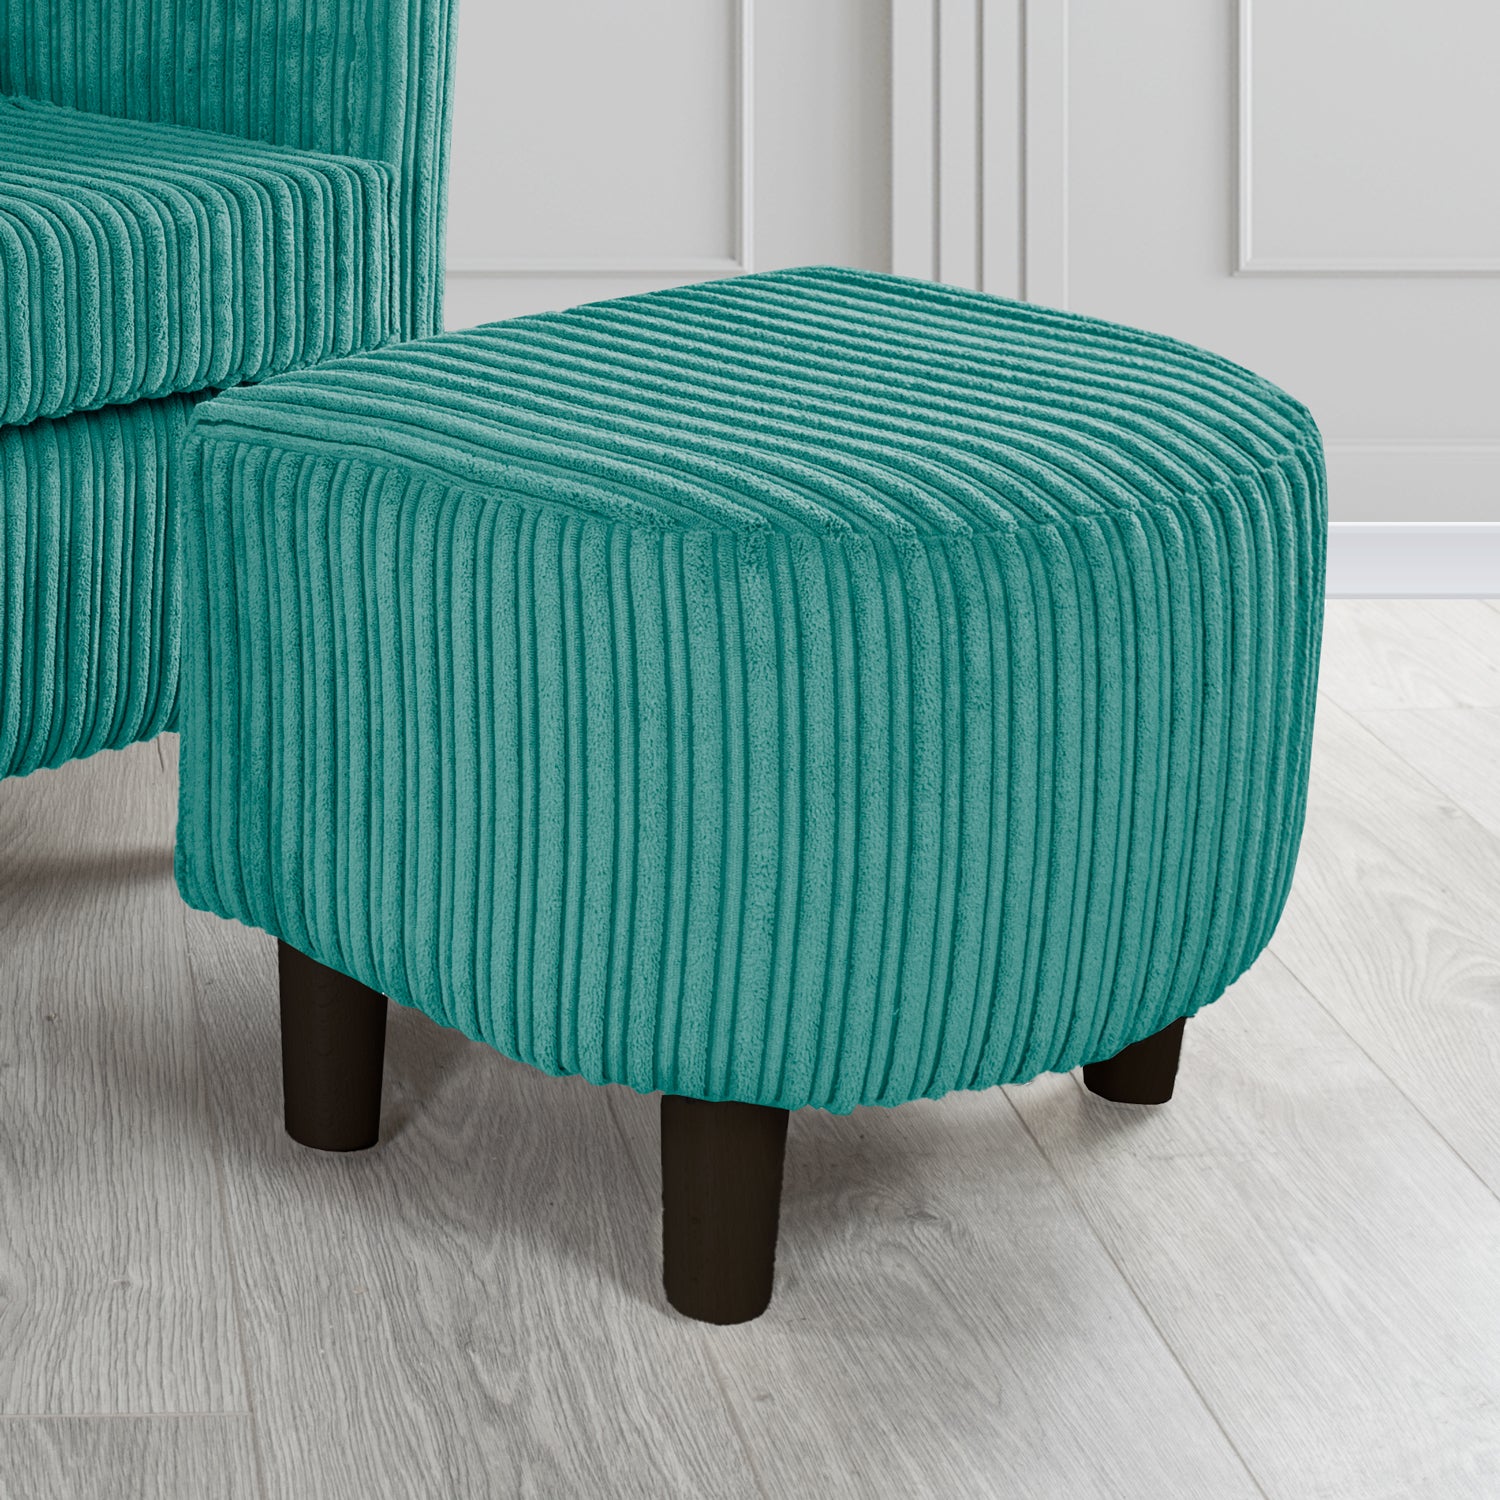 Tuscany Conway Teal Plain Textured Fabric Footstool (6587028045866)